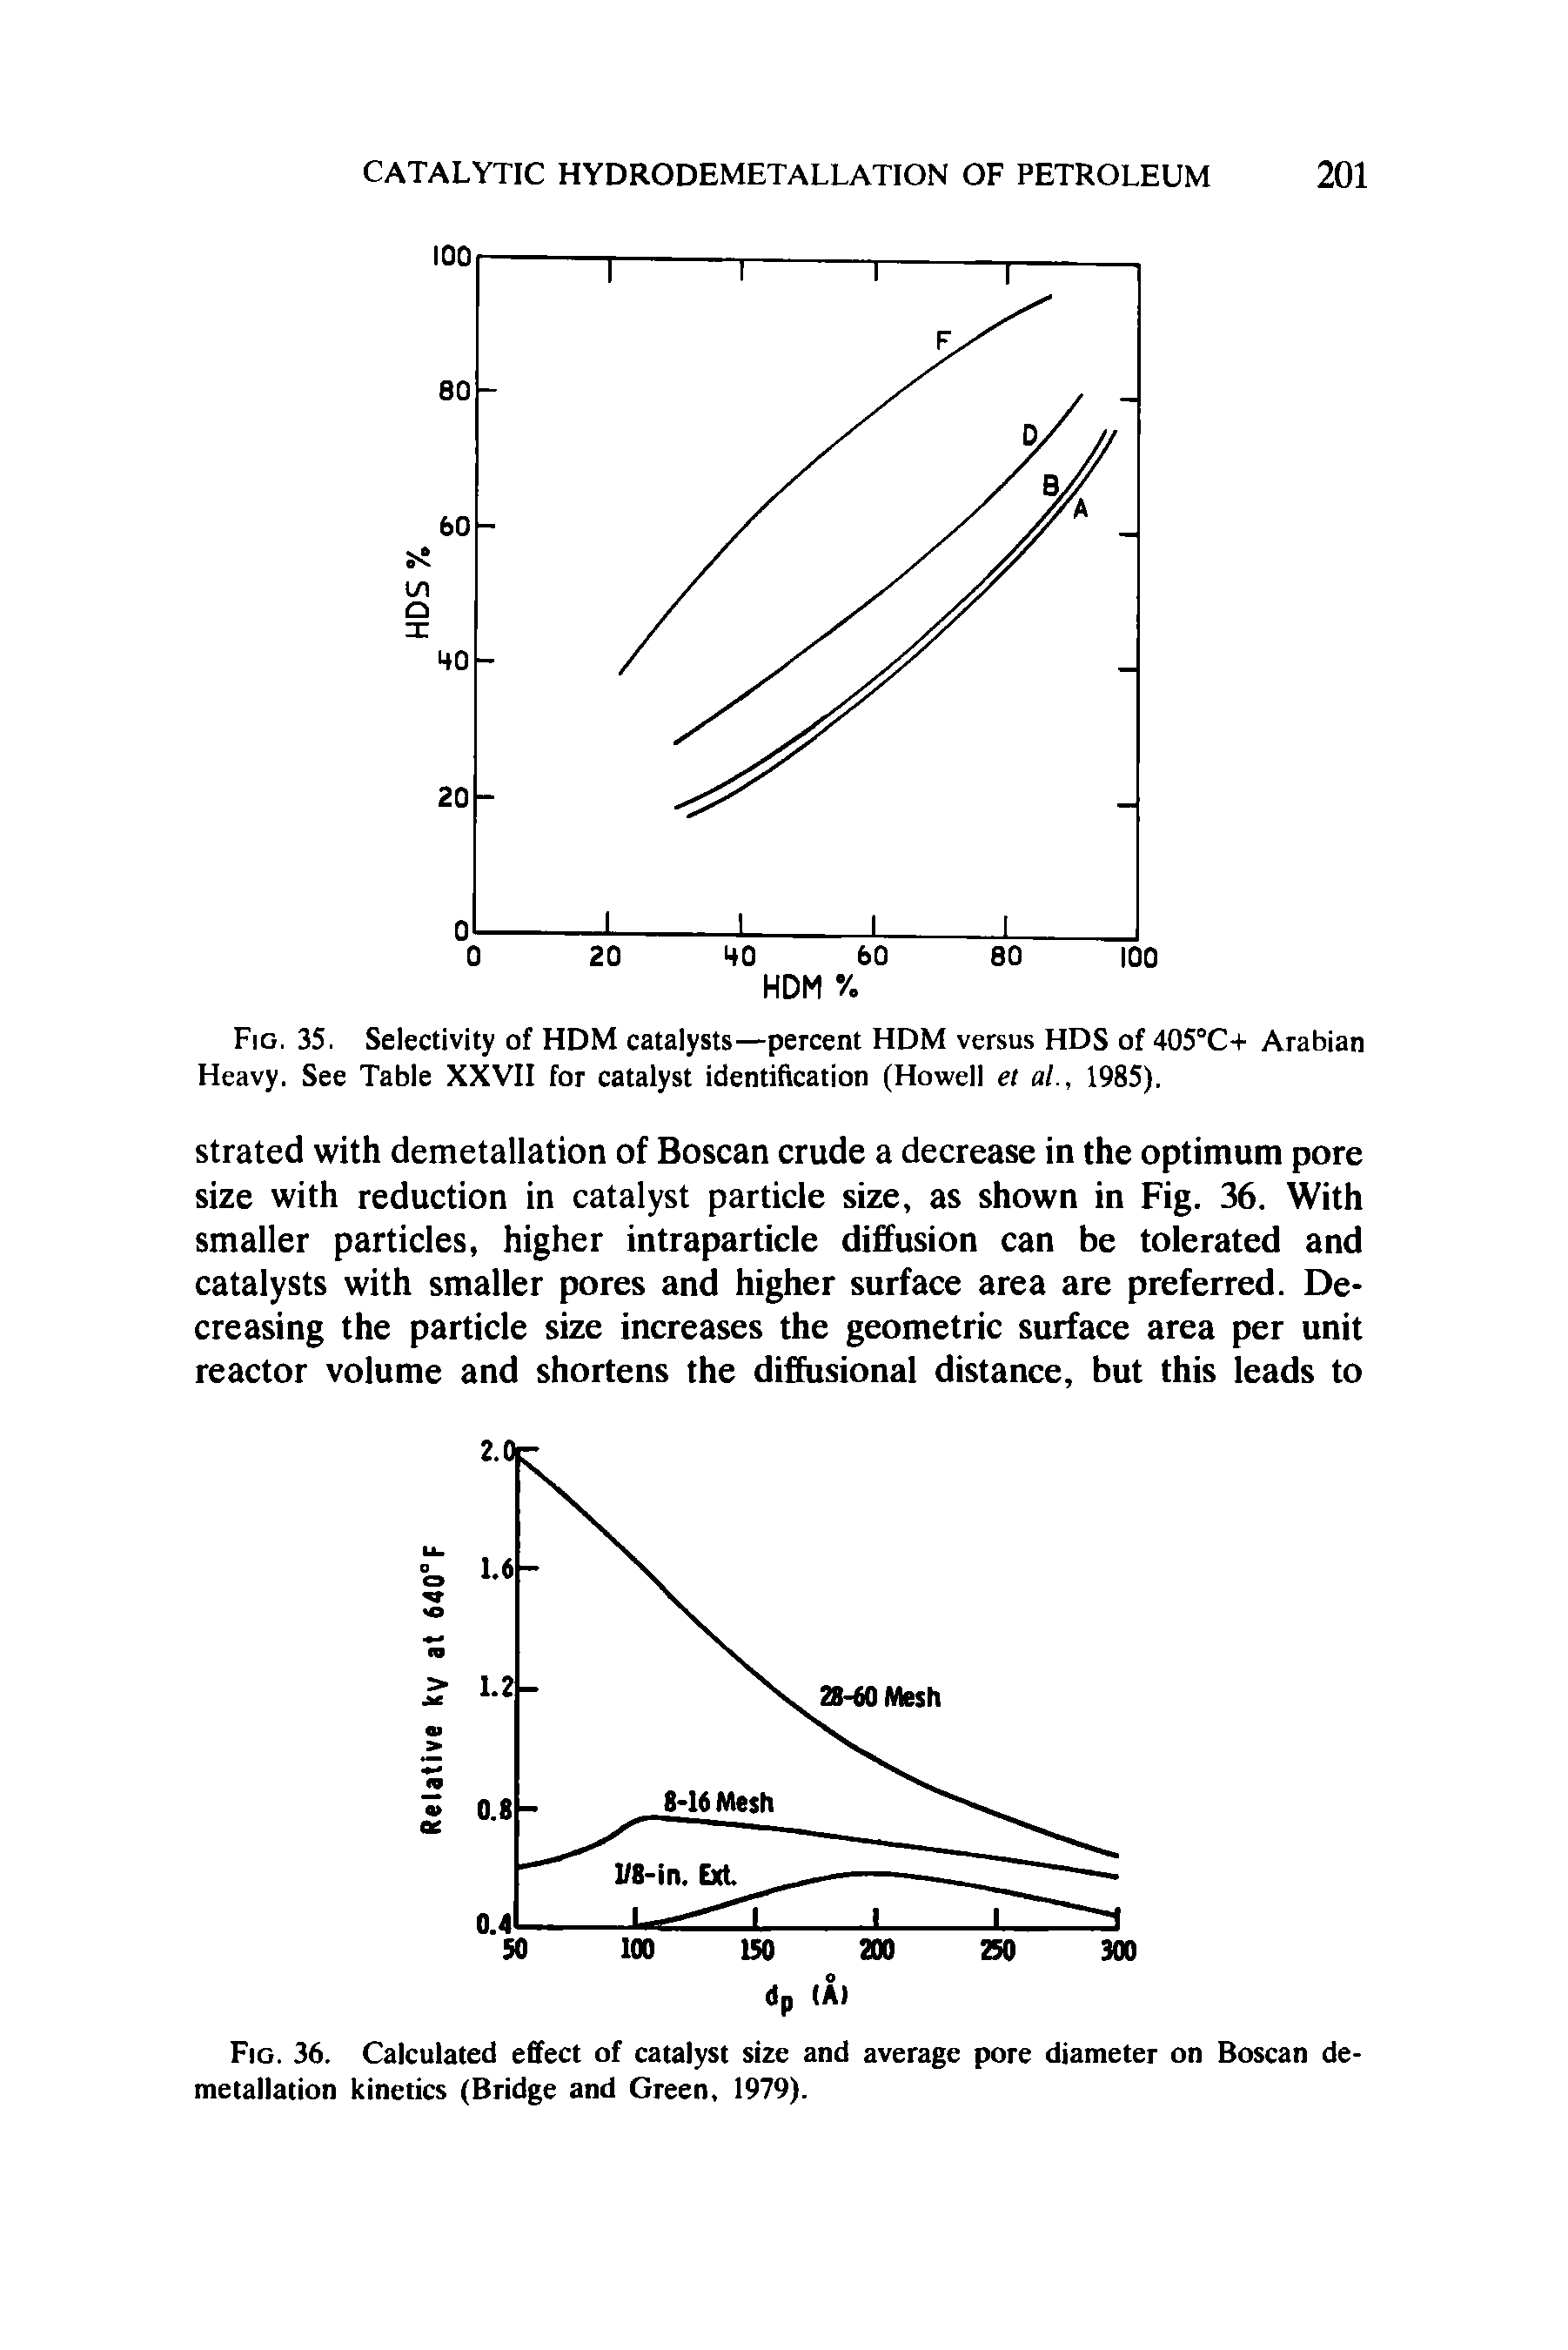 Fig. 36. Calculated effect of catalyst size and average pore diameter on Boscan demetallation kinetics (Bridge and Green, 1979).